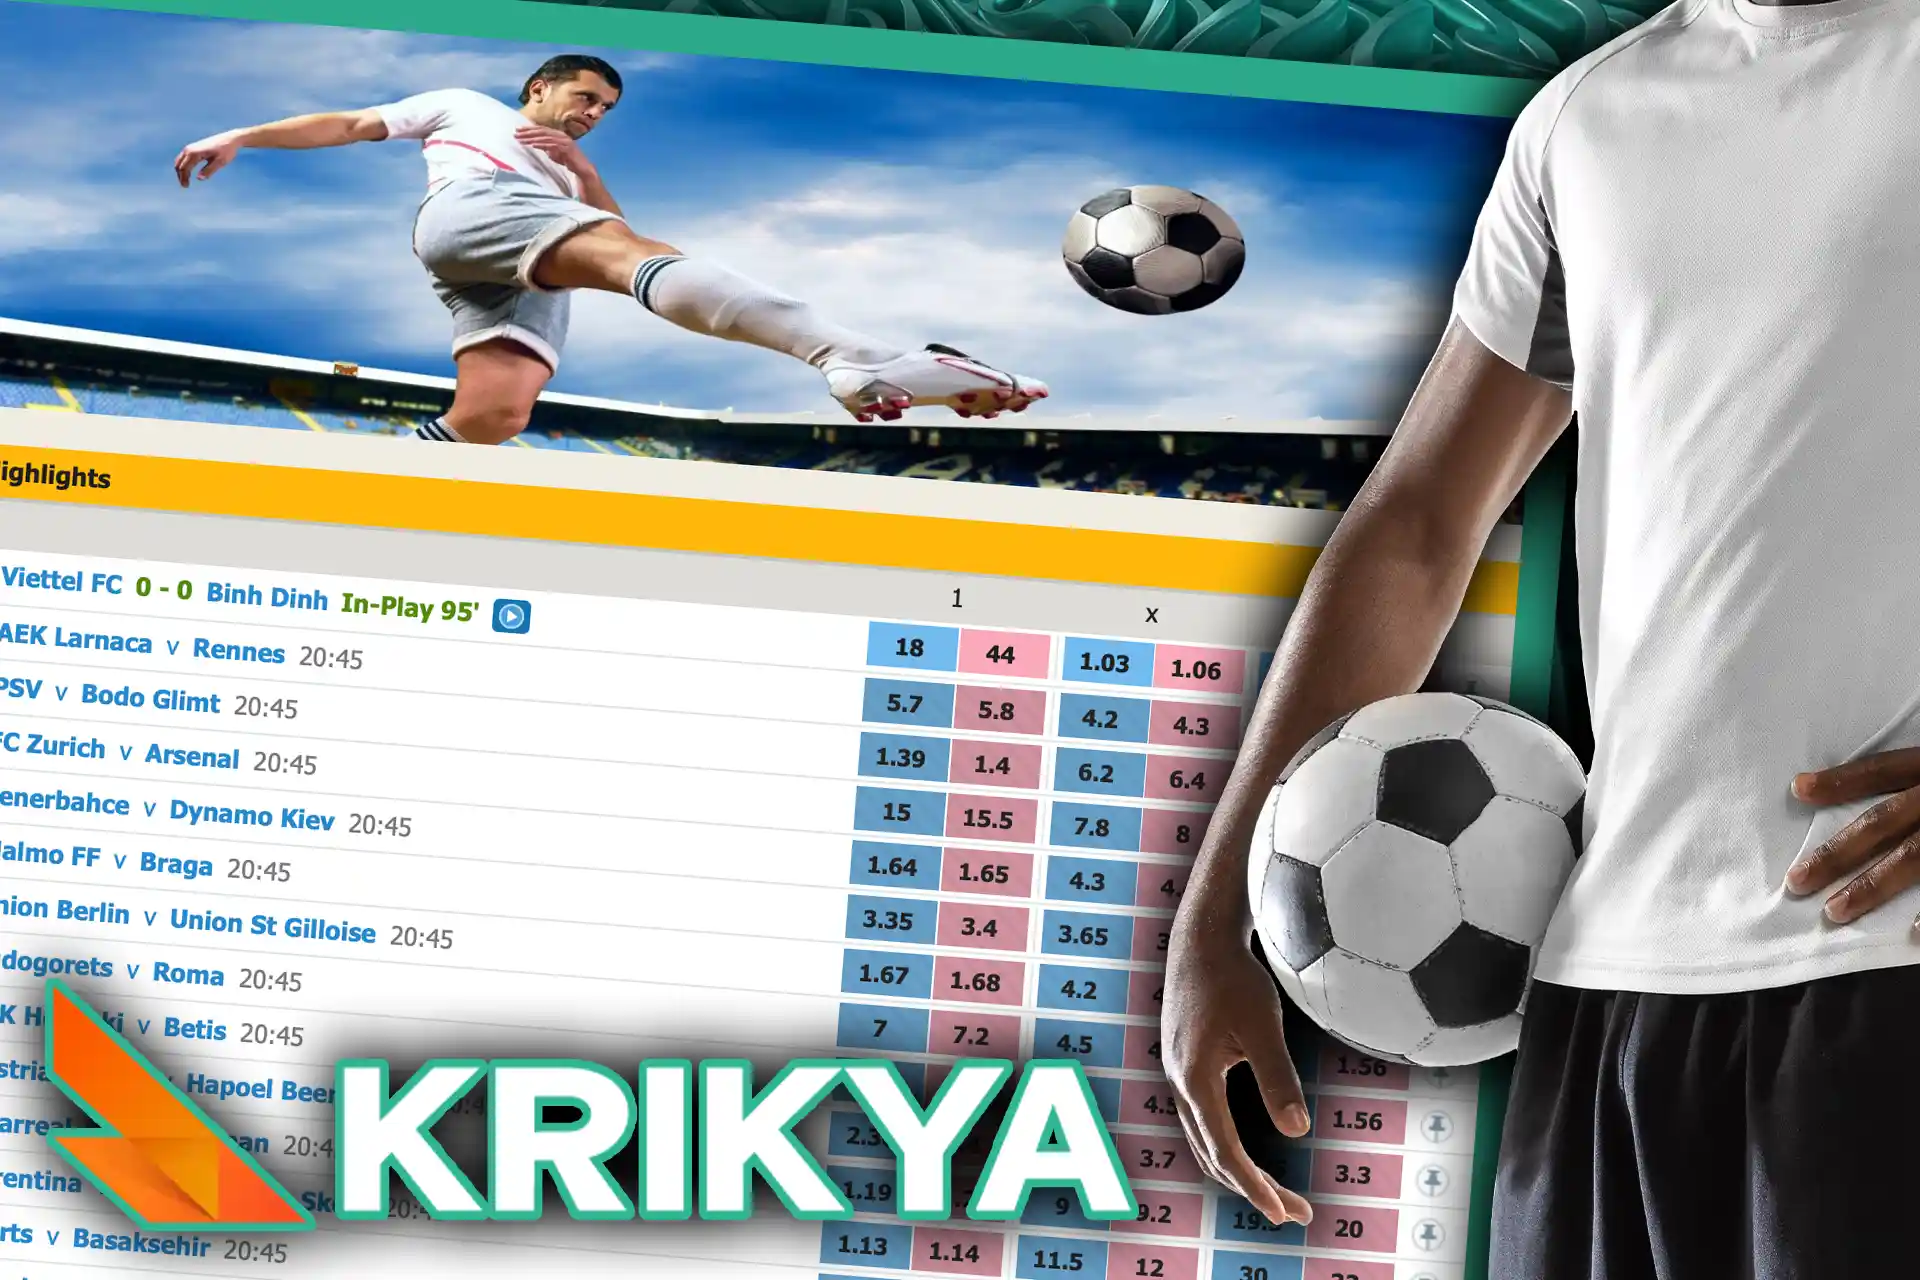 There are various options to bet on football at Krikya.